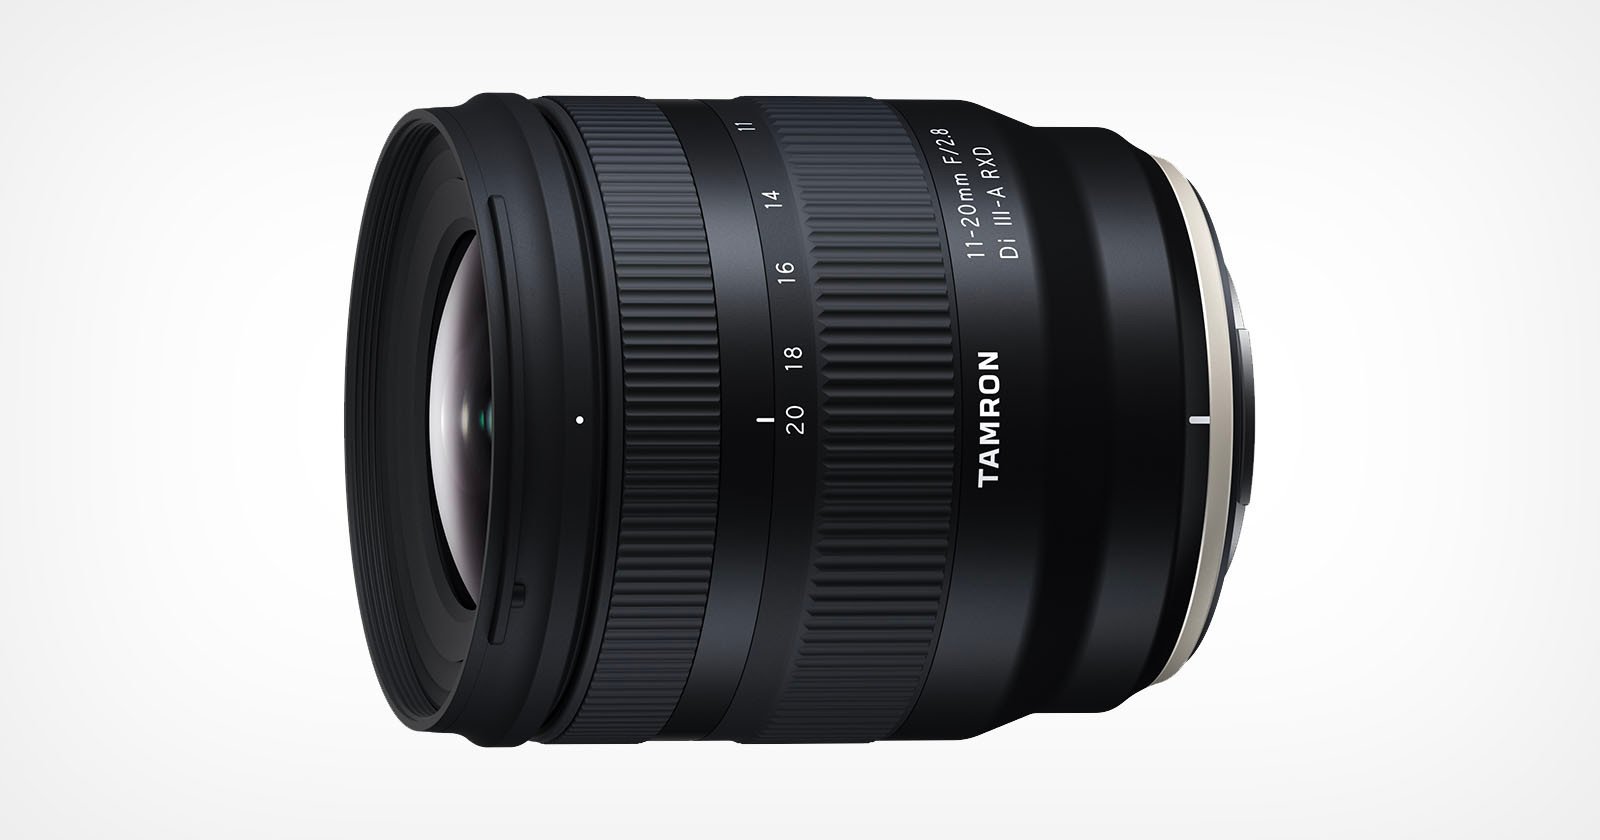 Tamron is Developing an 11-20mm f/2.8 Lens for Fujifilm X-Mount